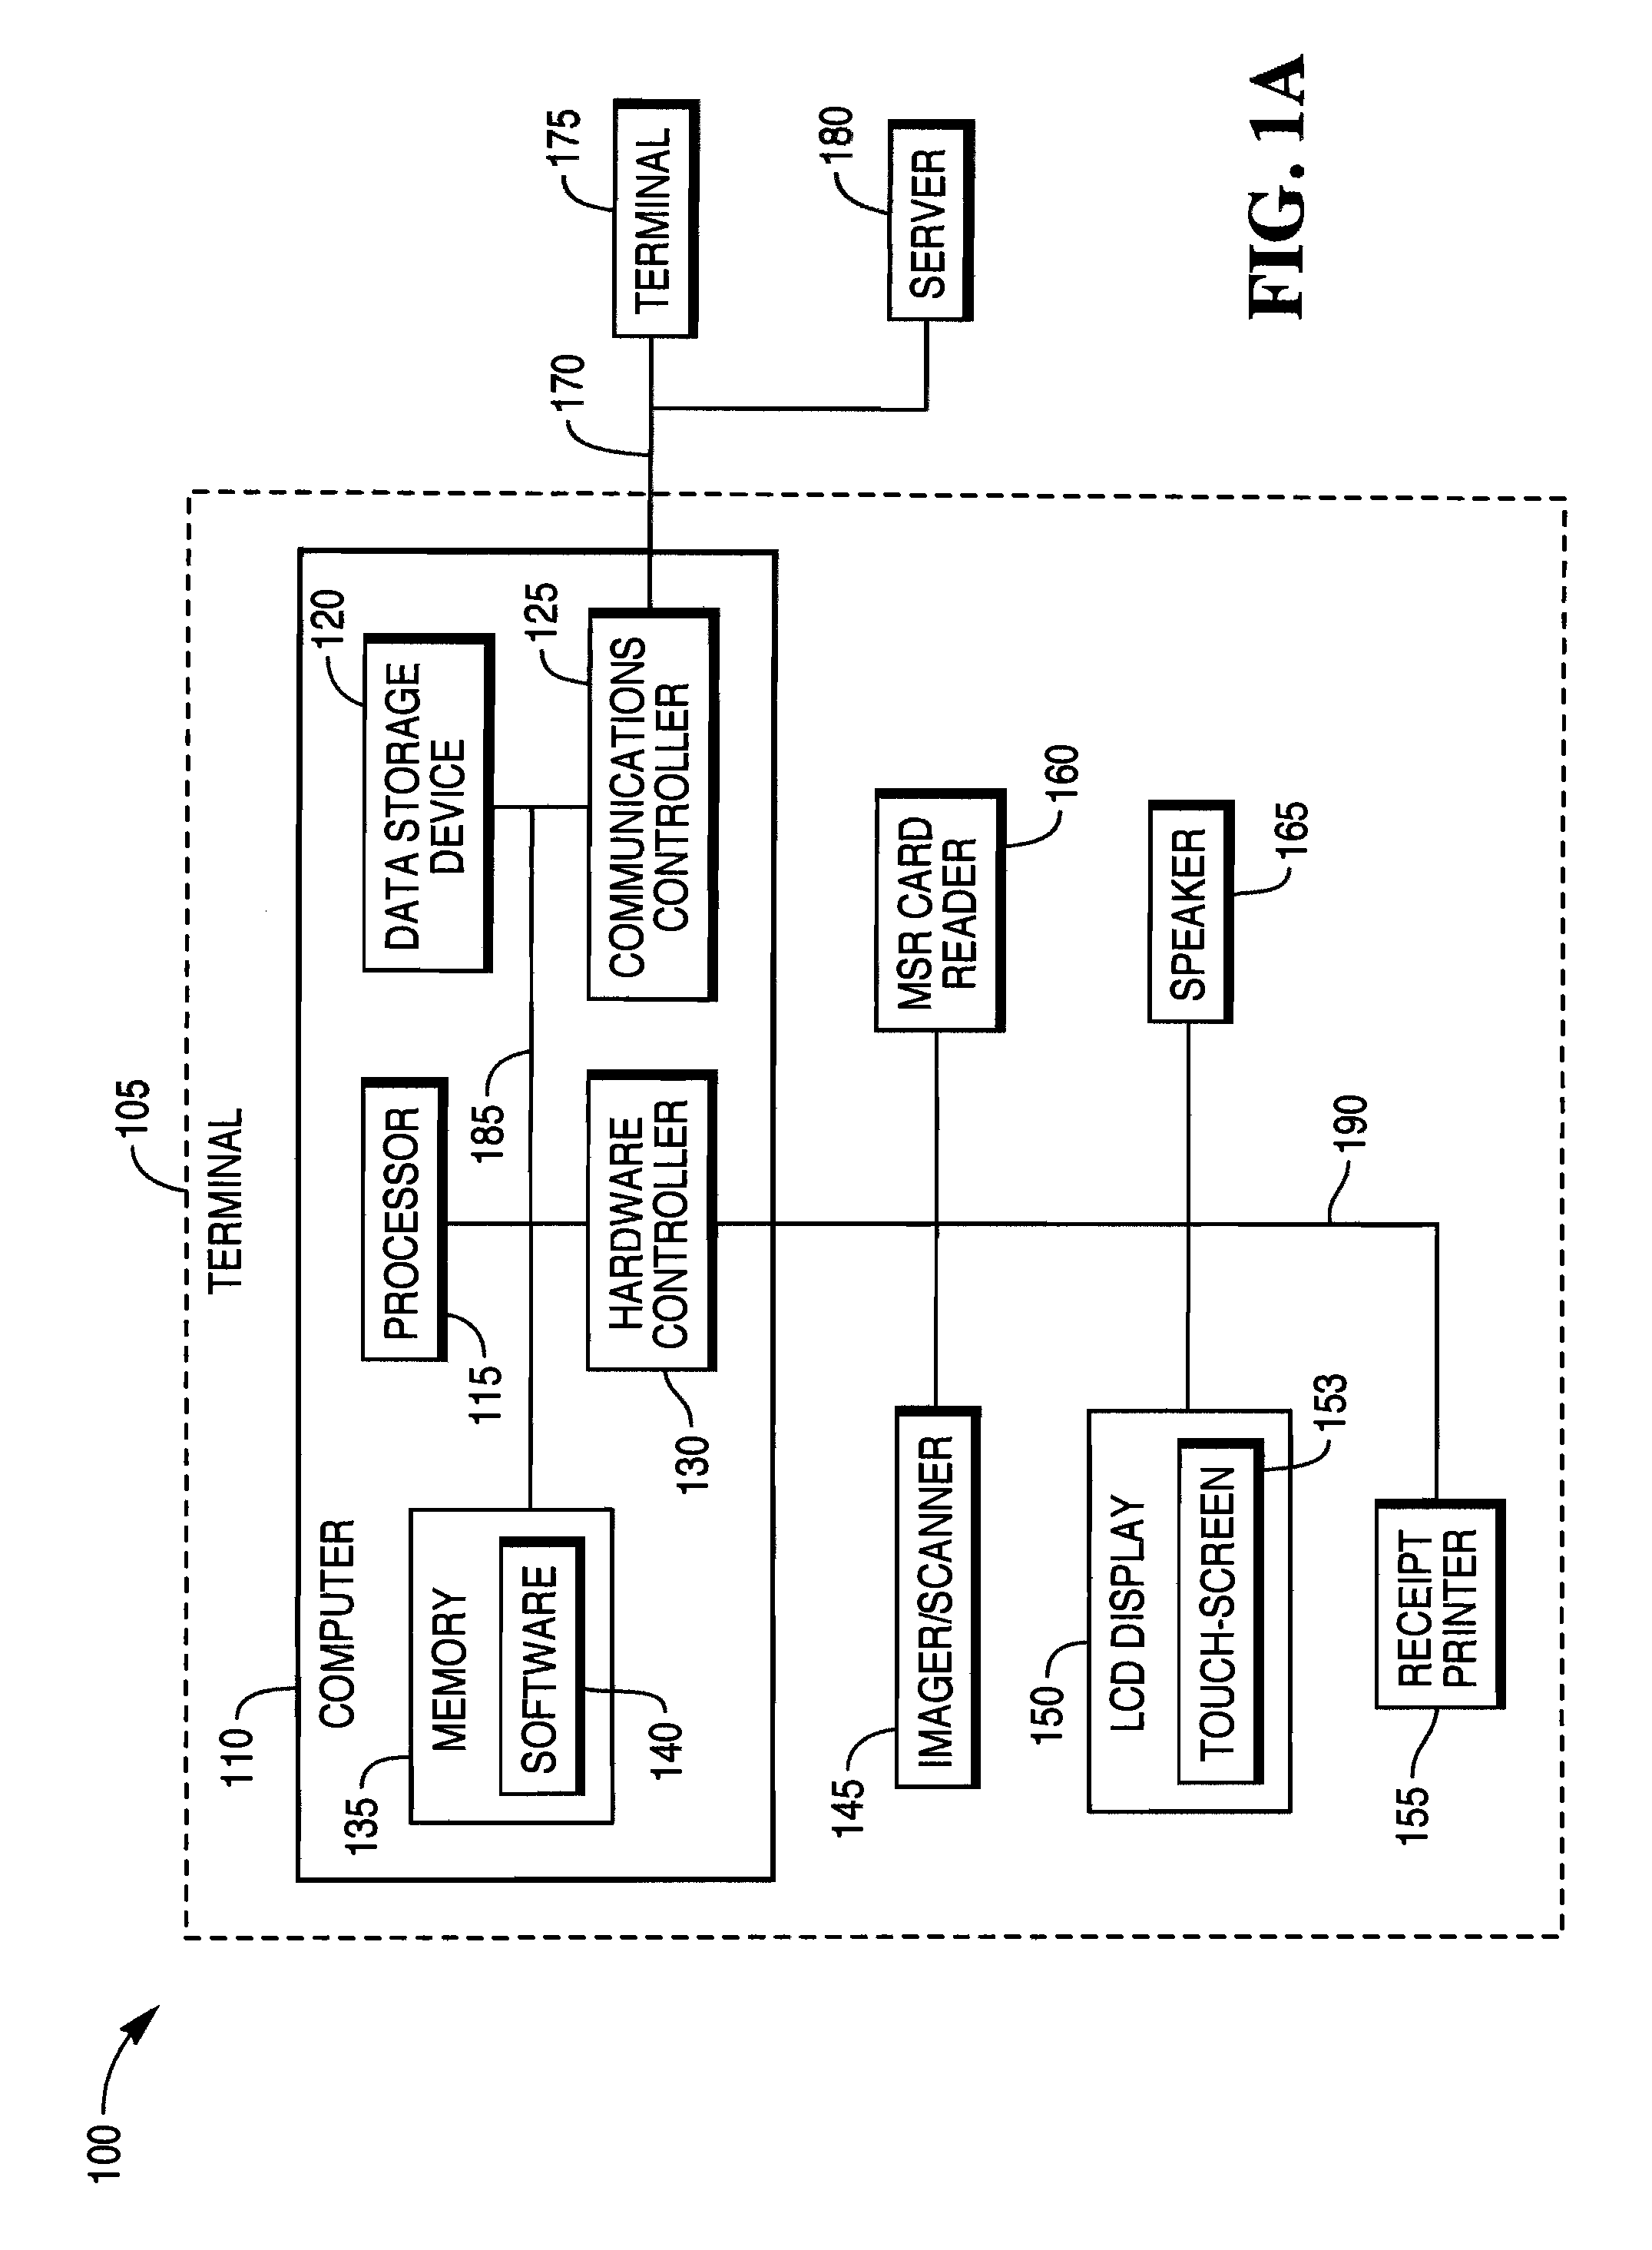 System, method and apparatus for implementing an improved user interface on a terminal